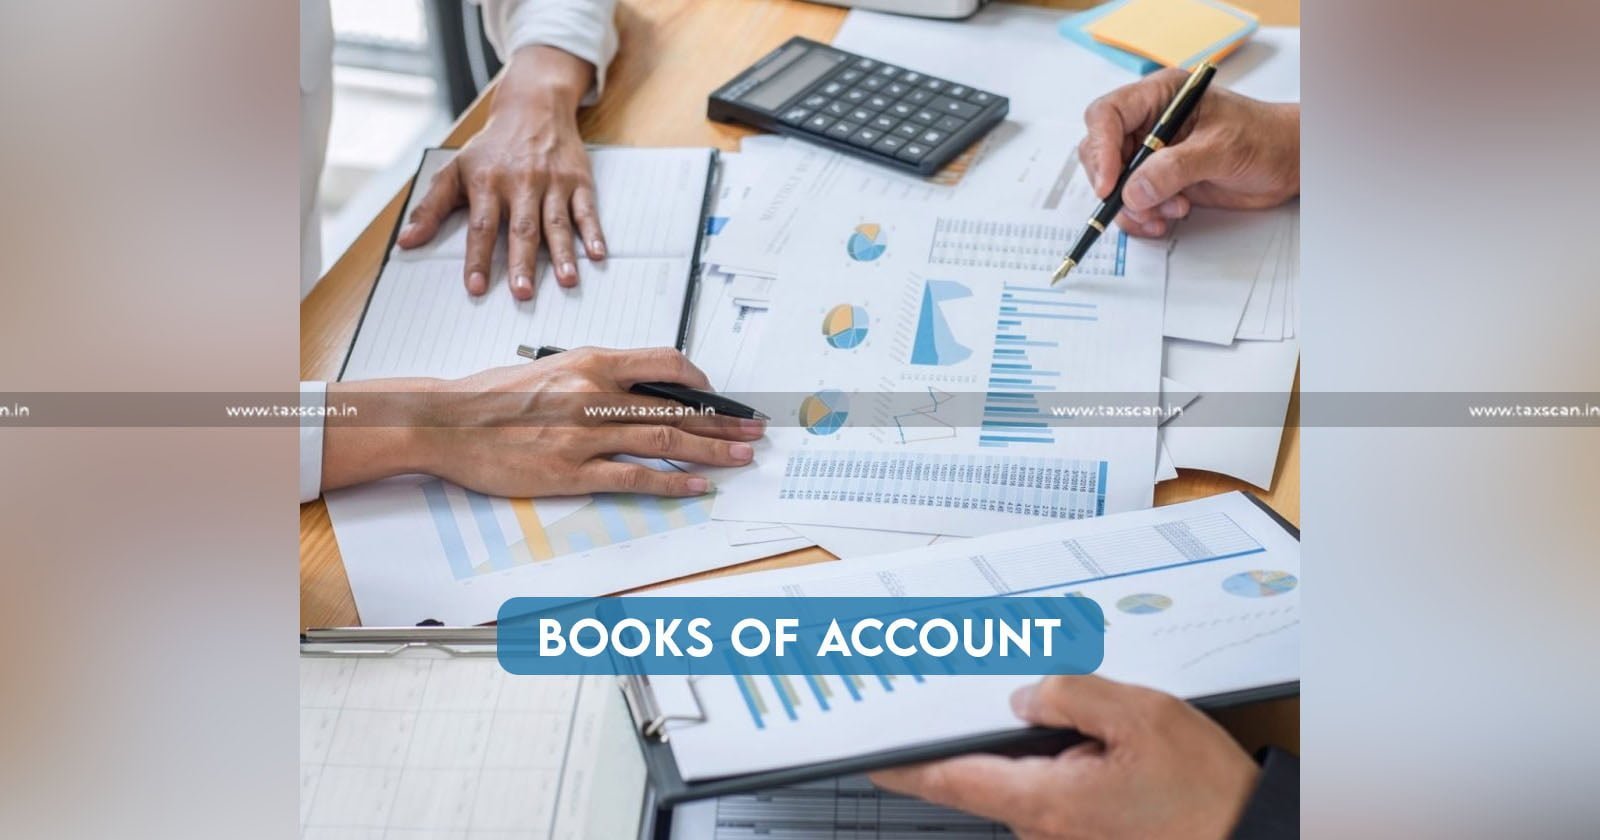 IT Act - Cash Deposits duly recorded in Books of Account - ITAT - Books of Account - Cash Deposits - taxscan